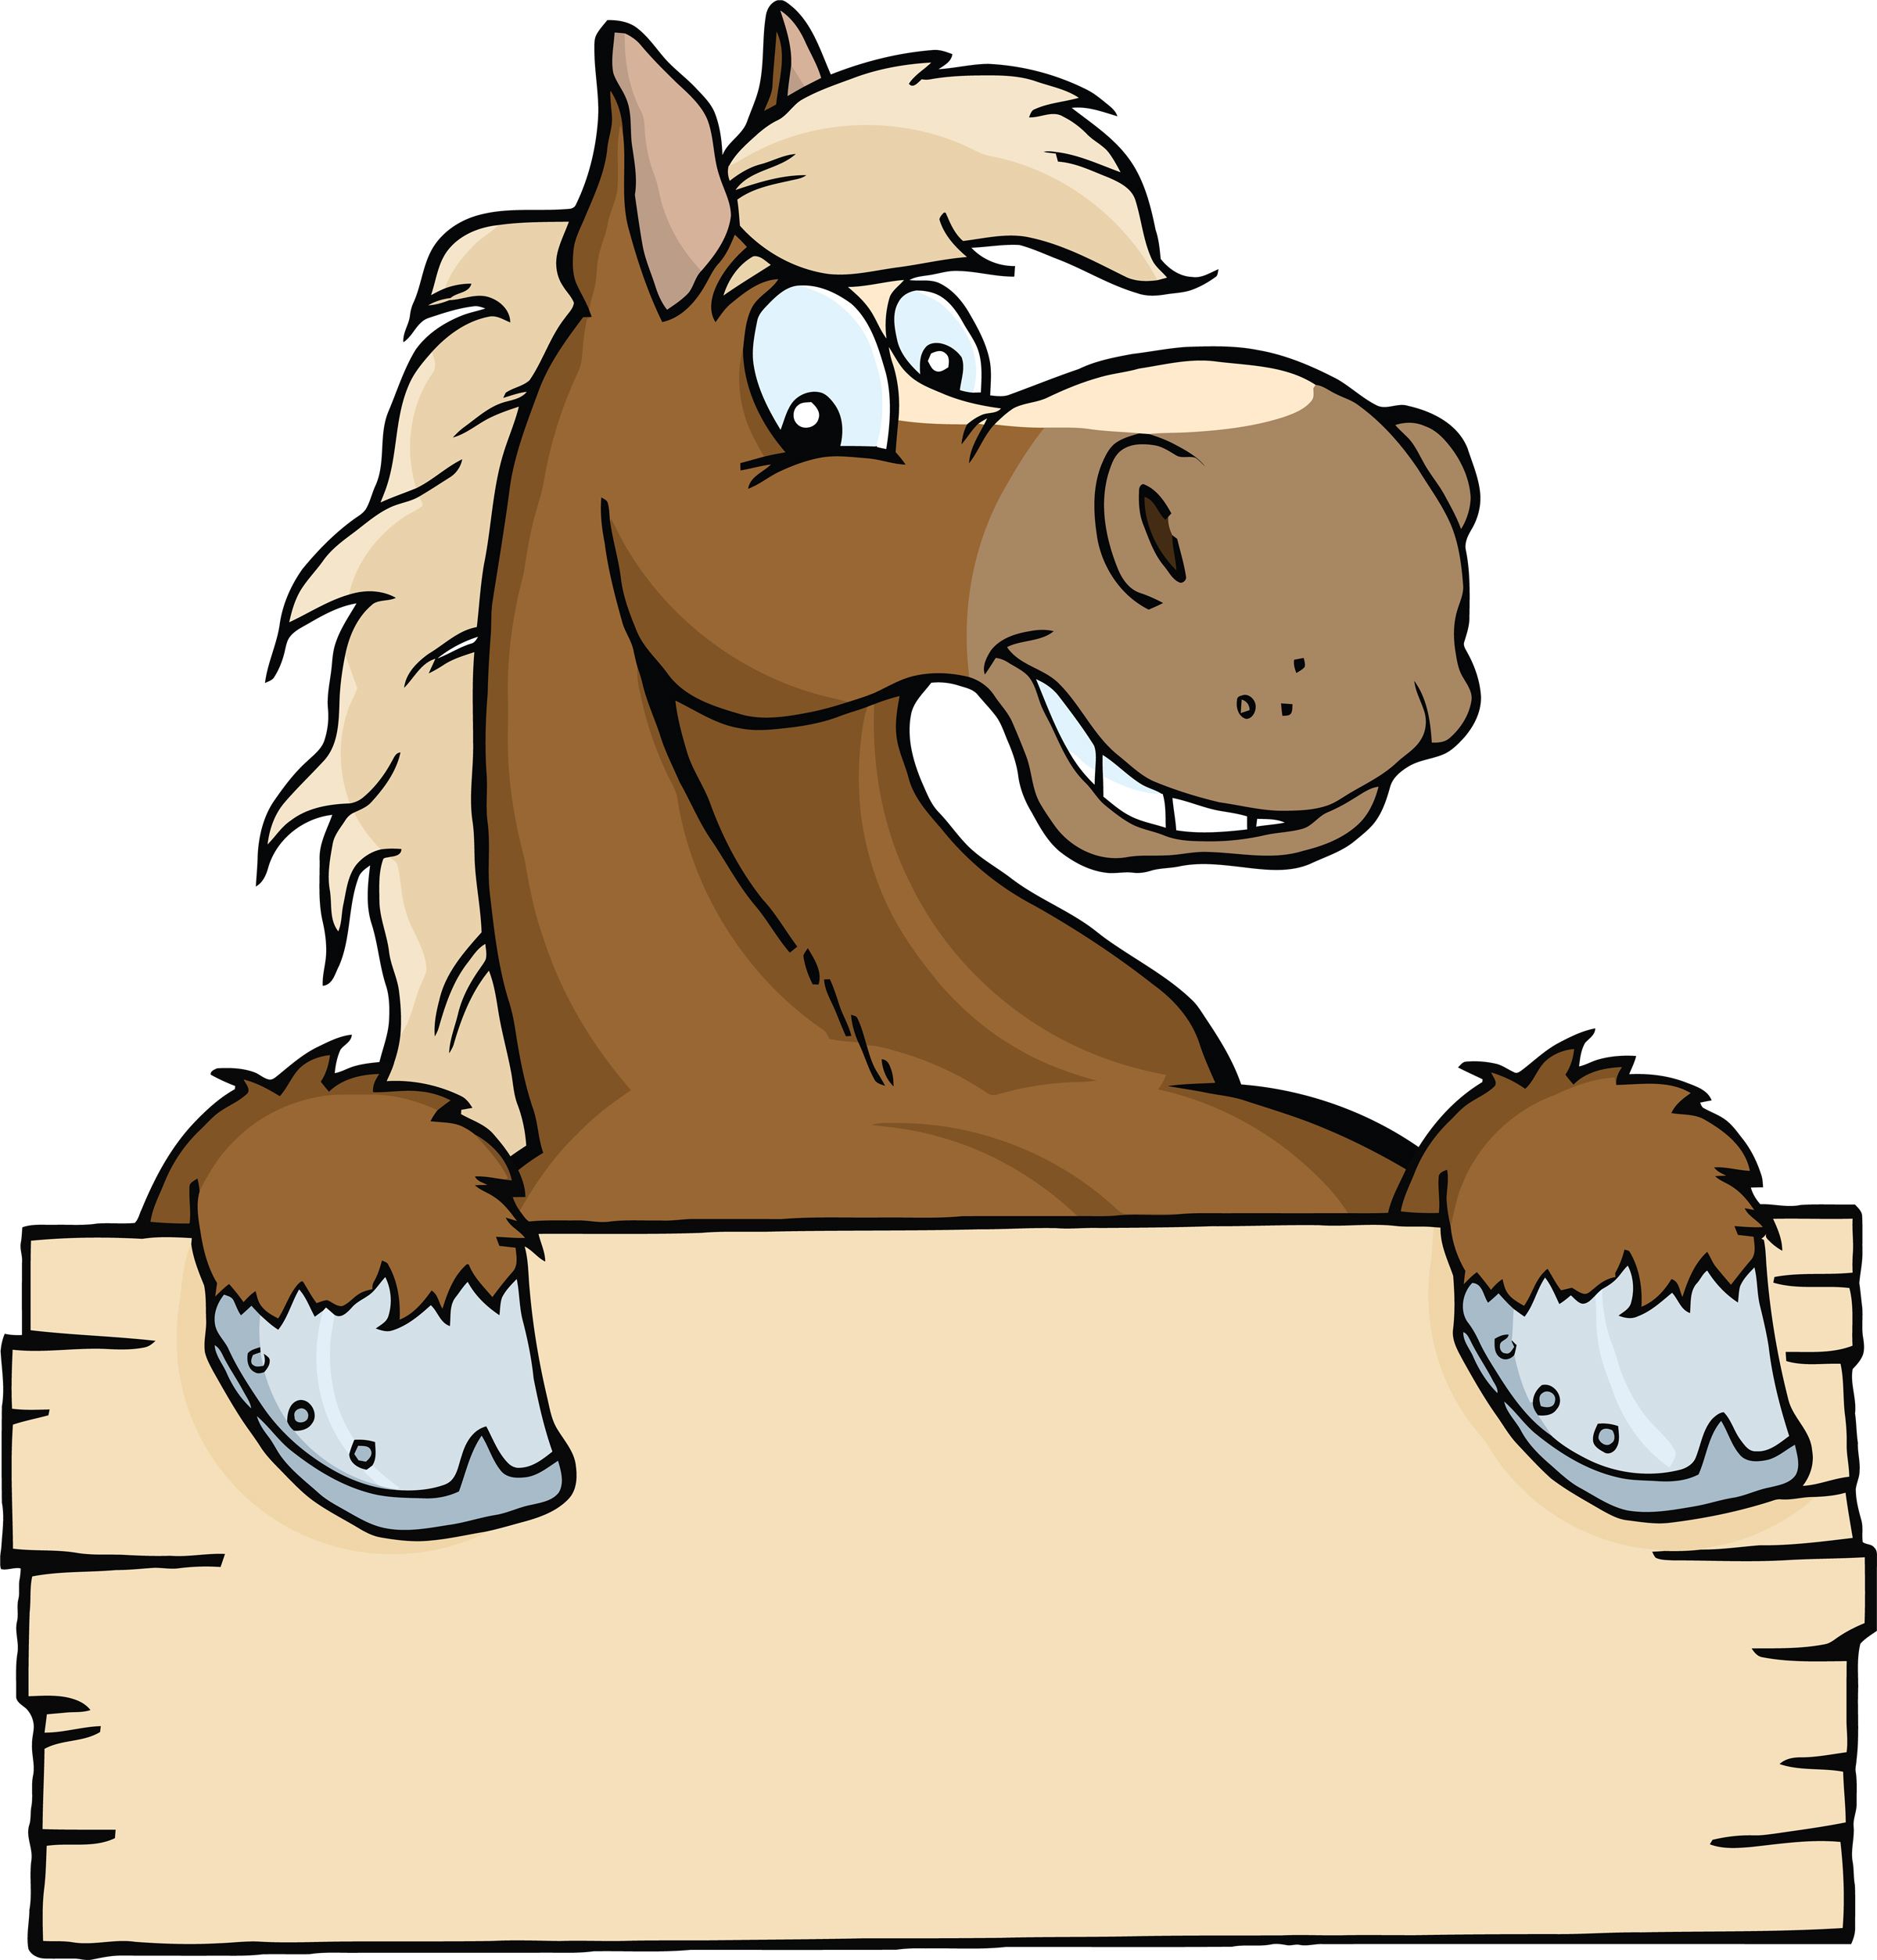 Related For Funny Horse Cartoon Wallpaper